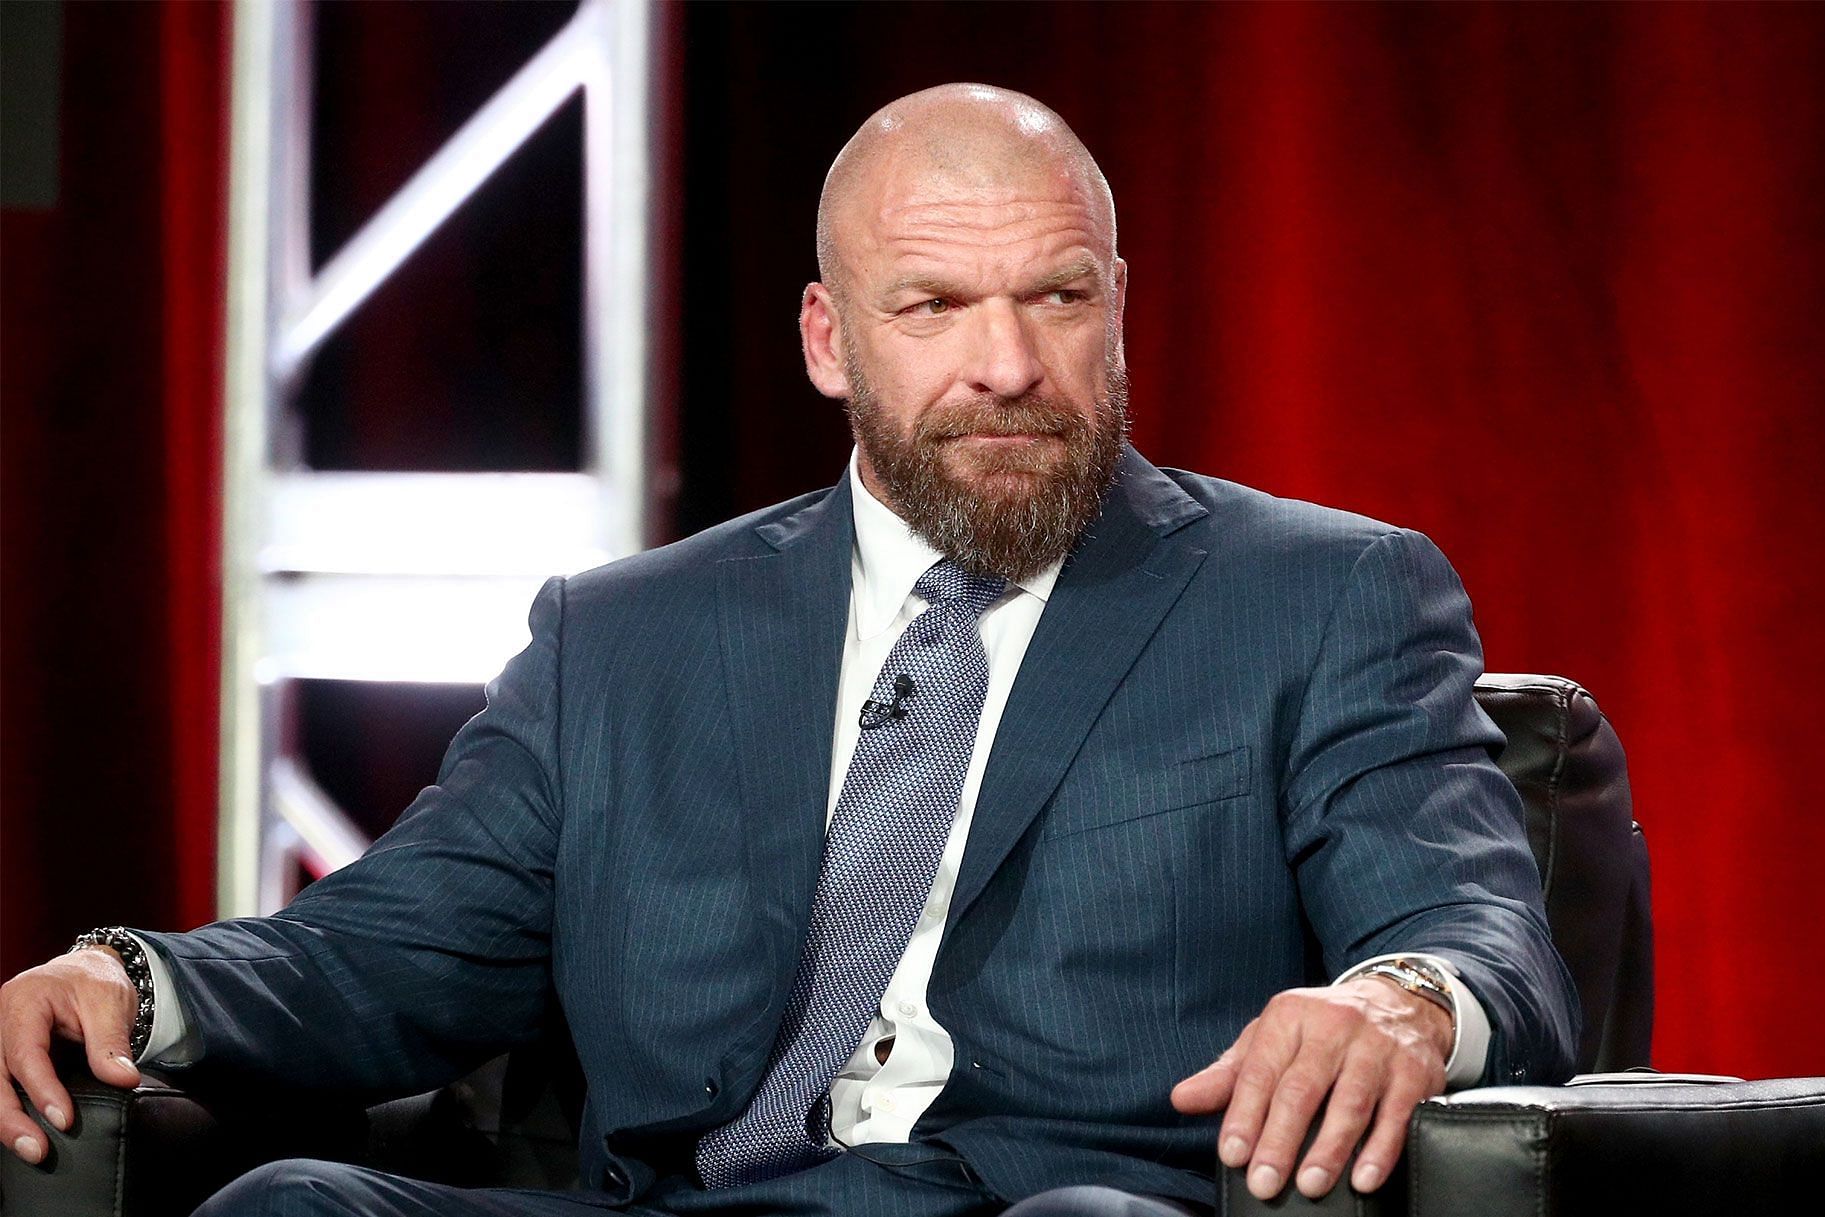 Triple H could bring in a lot of surprises for the Royal Rumble